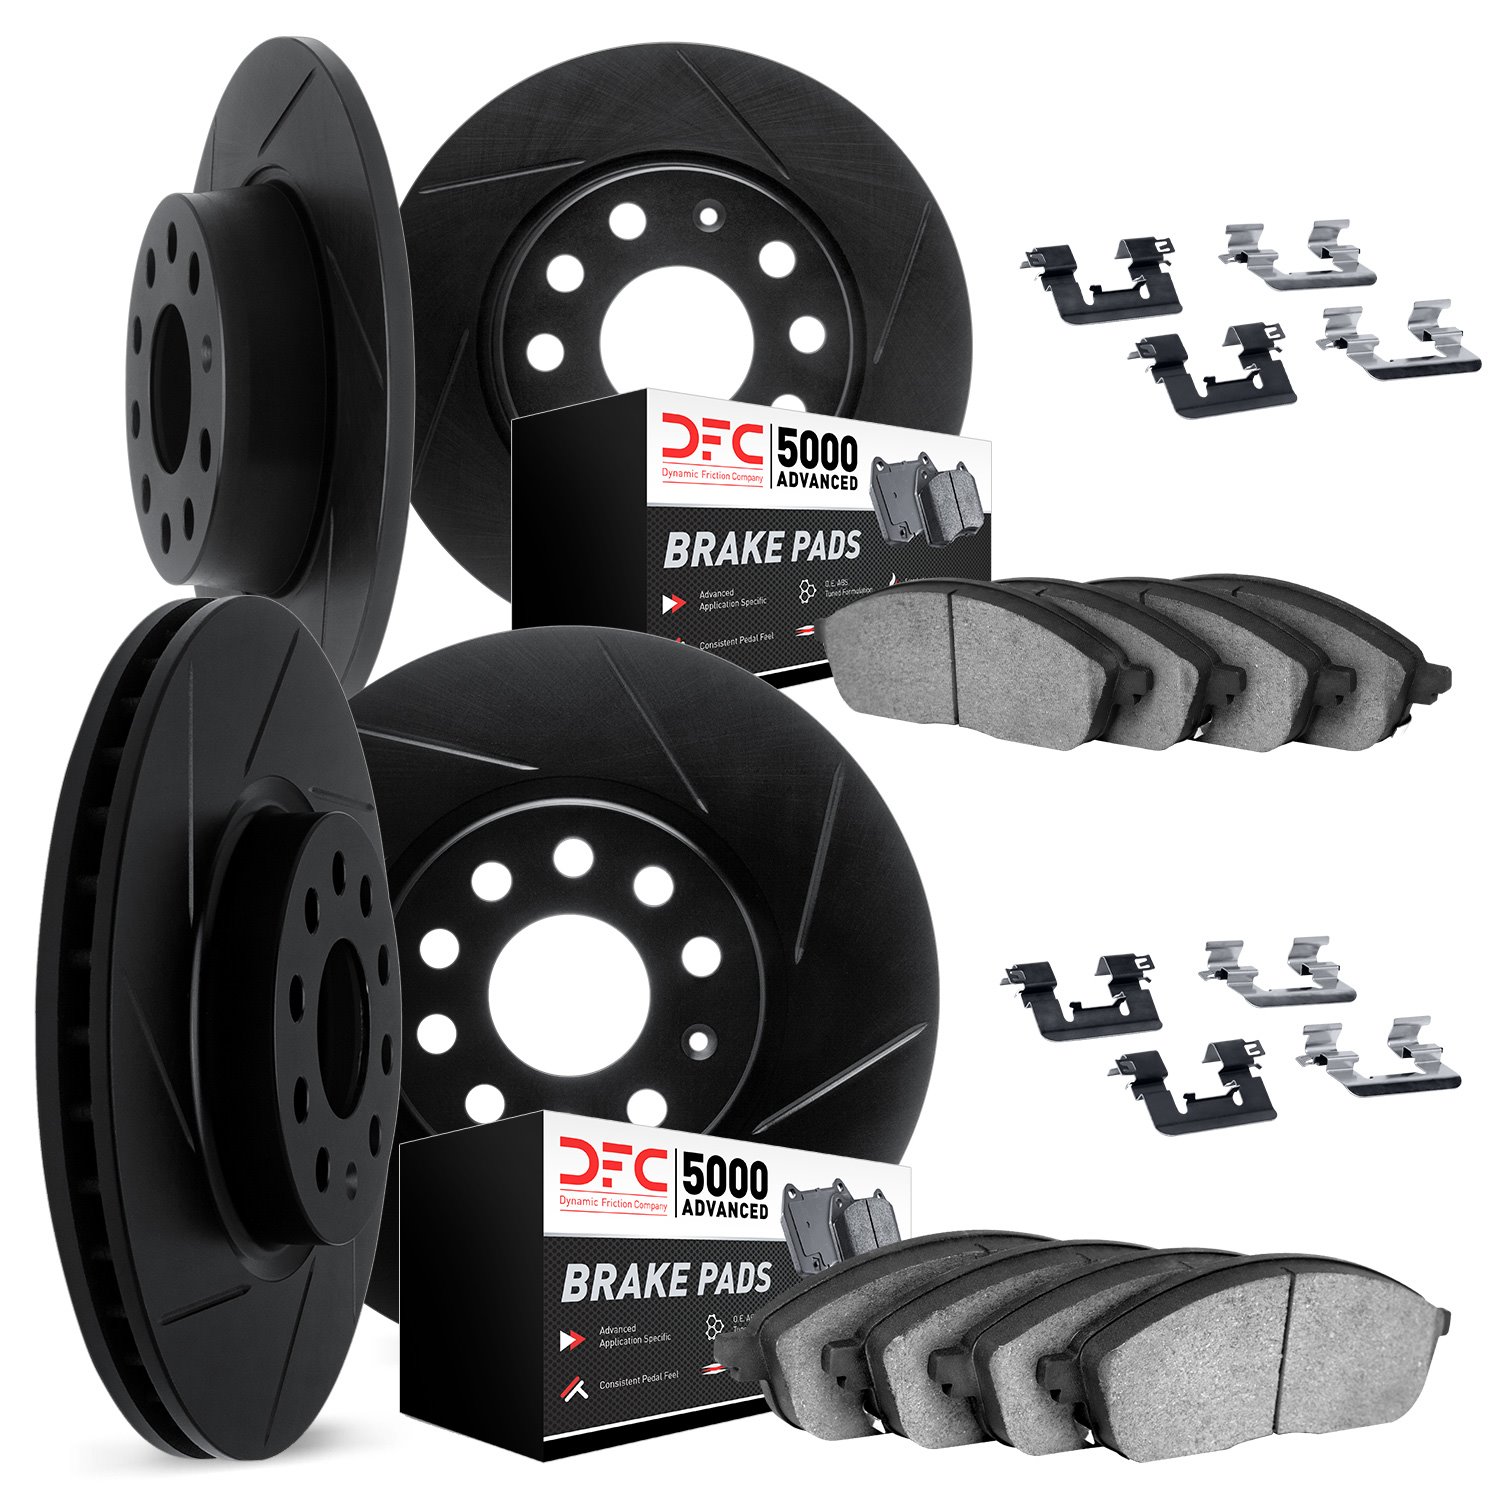 3514-59062 Slotted Brake Rotors w/5000 Advanced Brake Pads Kit & Hardware [Black], 2007-2016 Acura/Honda, Position: Front and Re